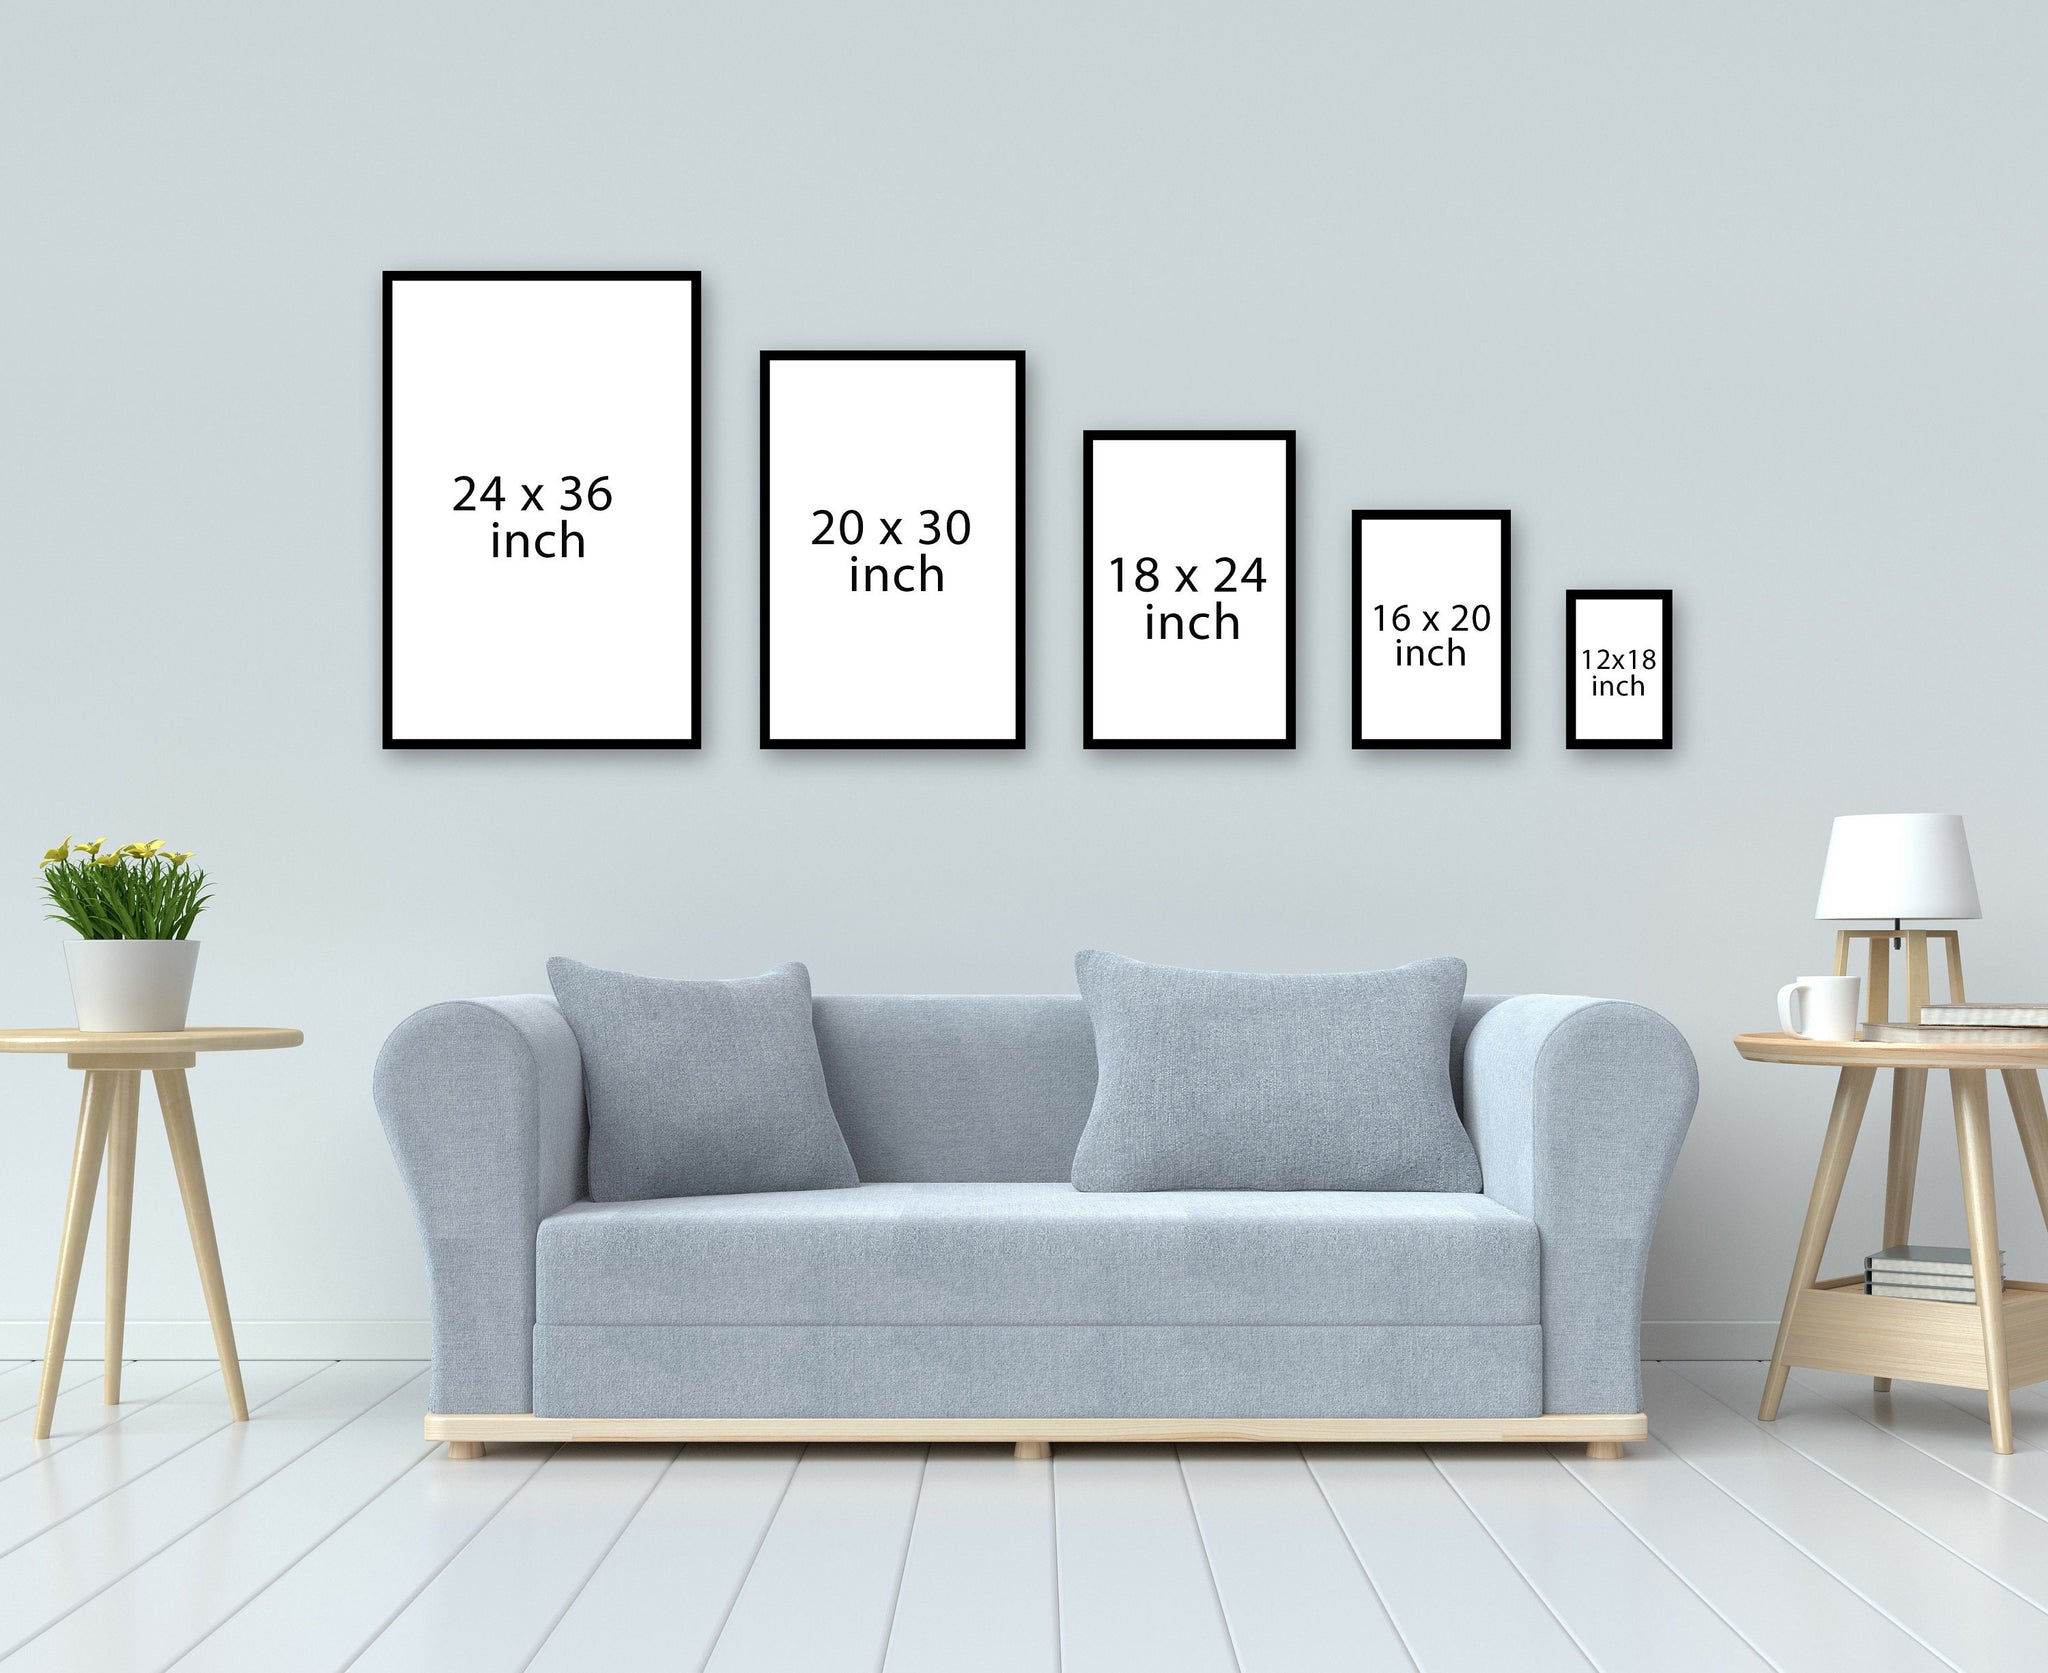 Stay Inspired, Quotes Poster Print